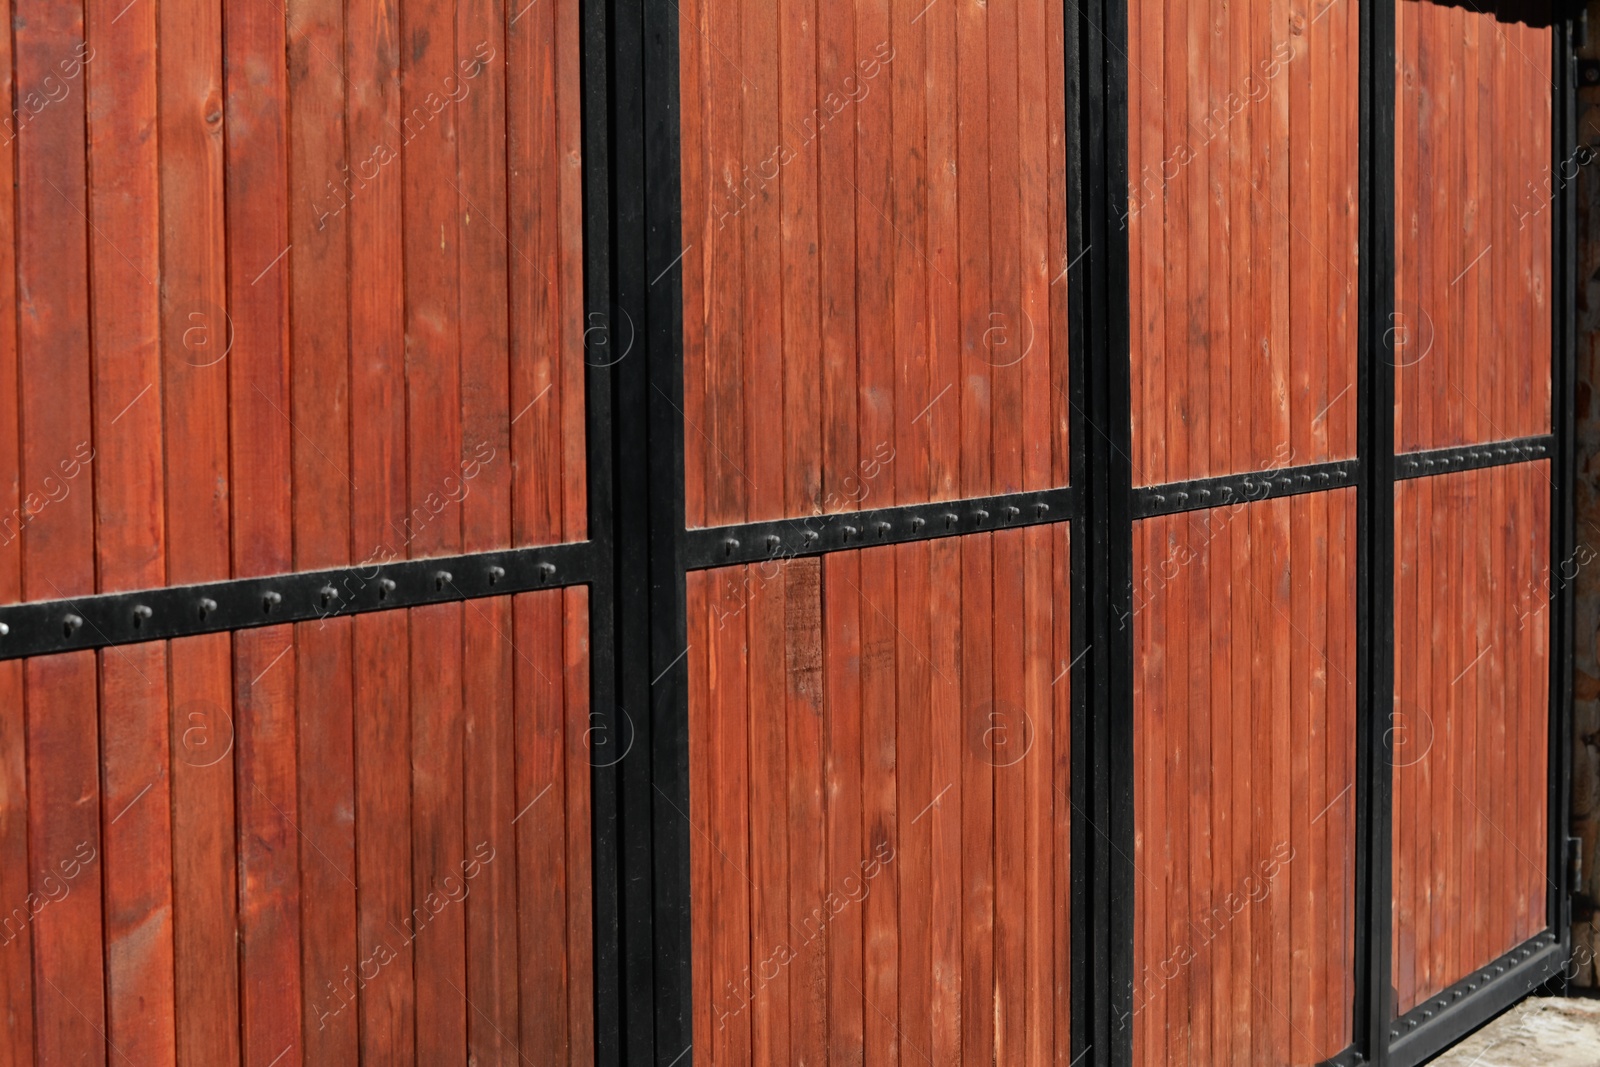 Photo of Metal and wooden fence outdoors on sunny day